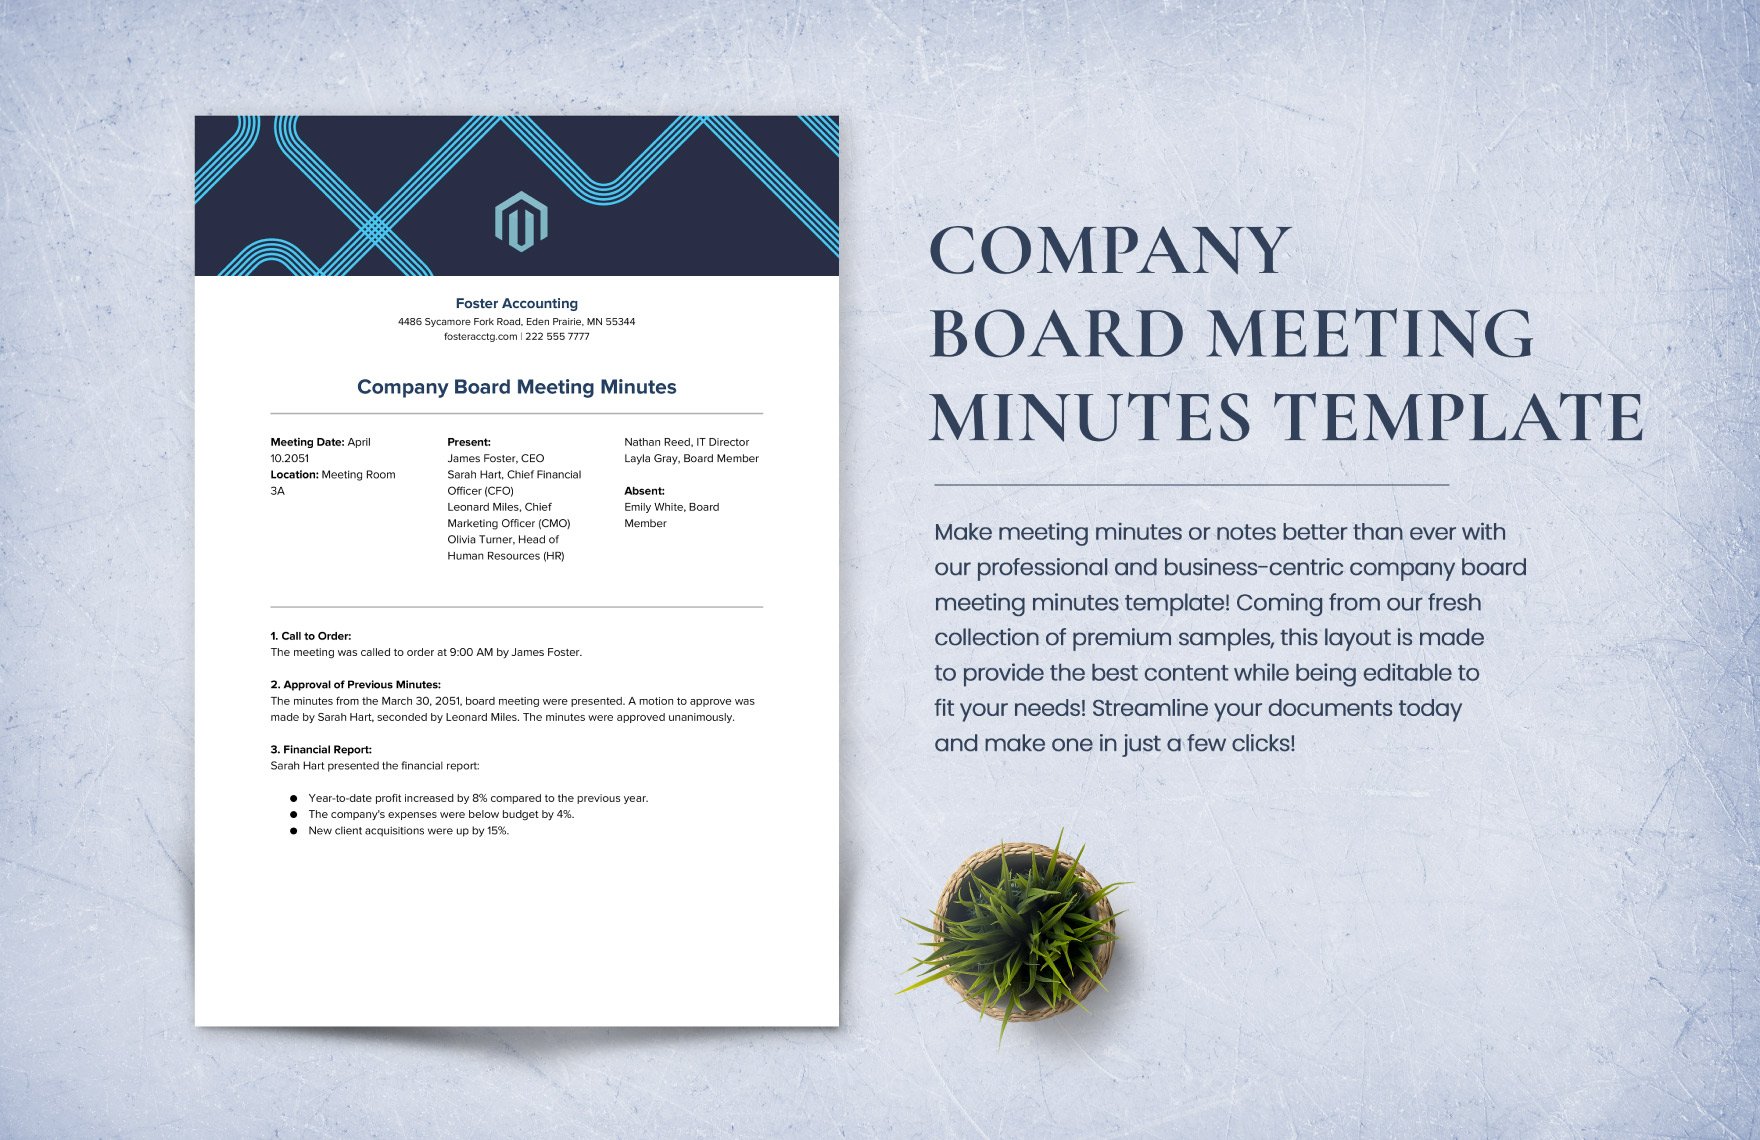 Company Board Meeting Minutes Template